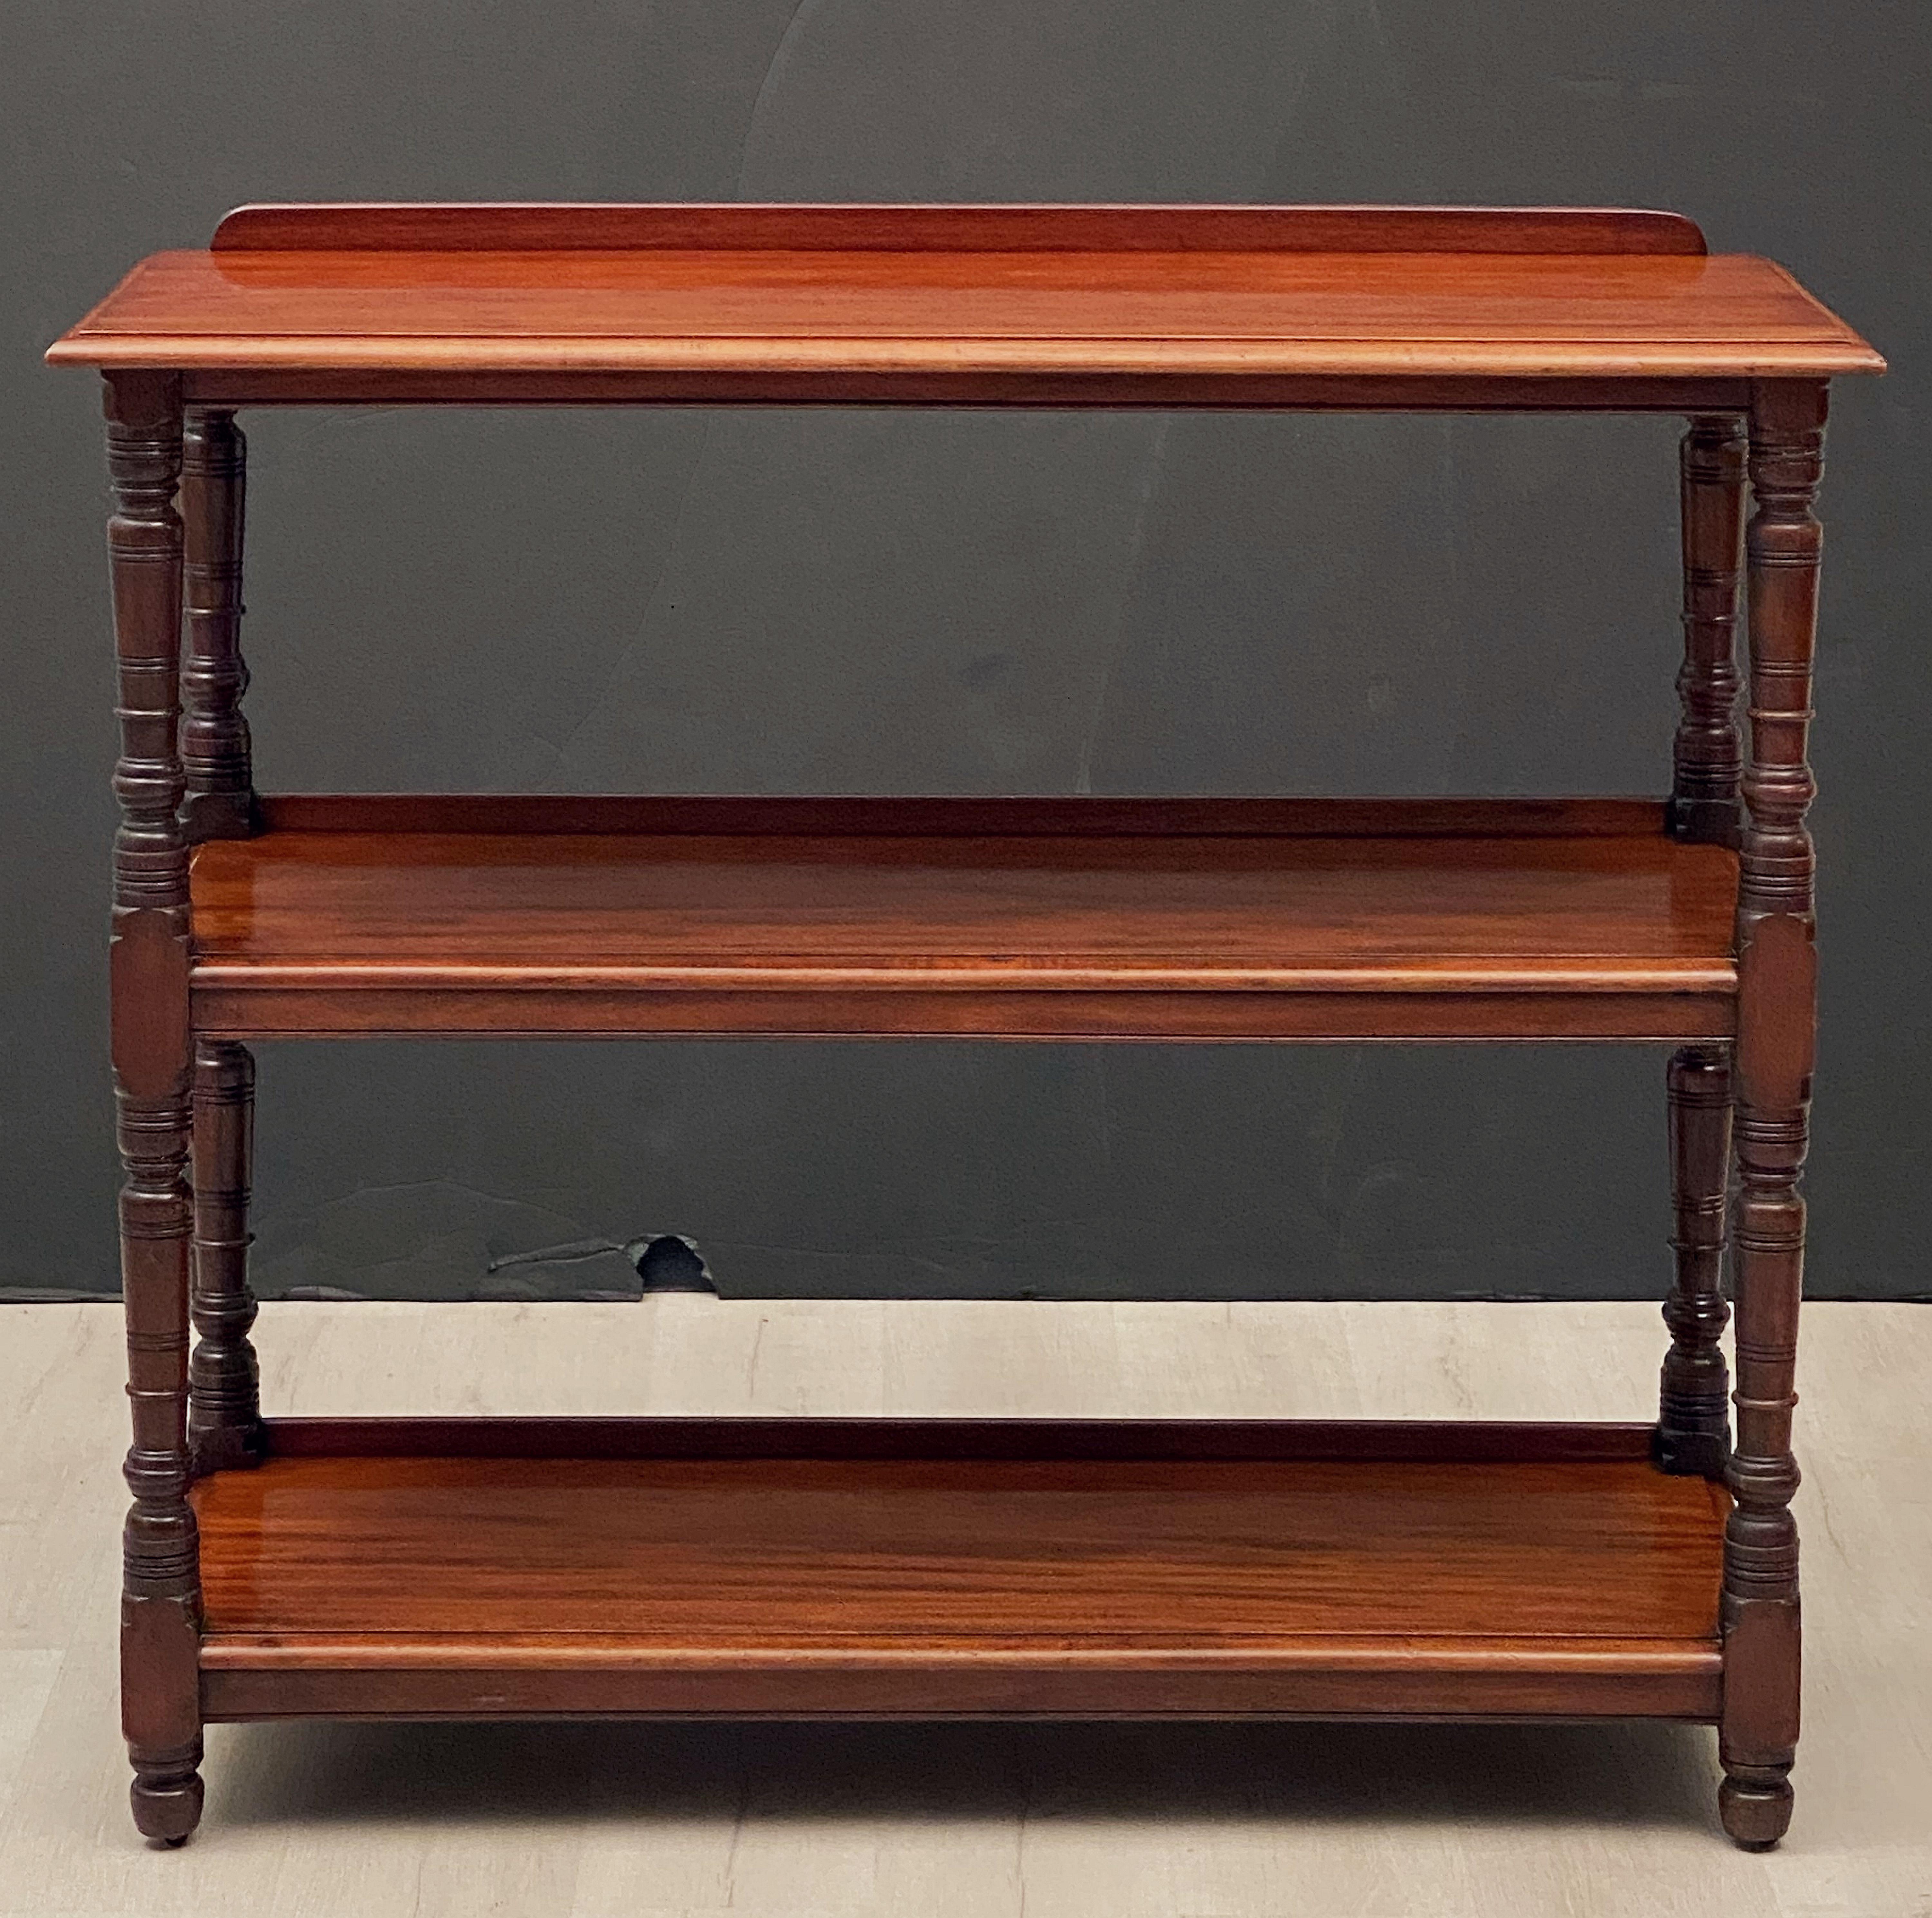 A fine English buffet trolley or console server (or dumb waiter) of mahogany, featuring three tiers with edge-moulded tops, each with back gallery frieze, each tier adjoined to four turned column supports, set upon rolling brass casters.

Engraved